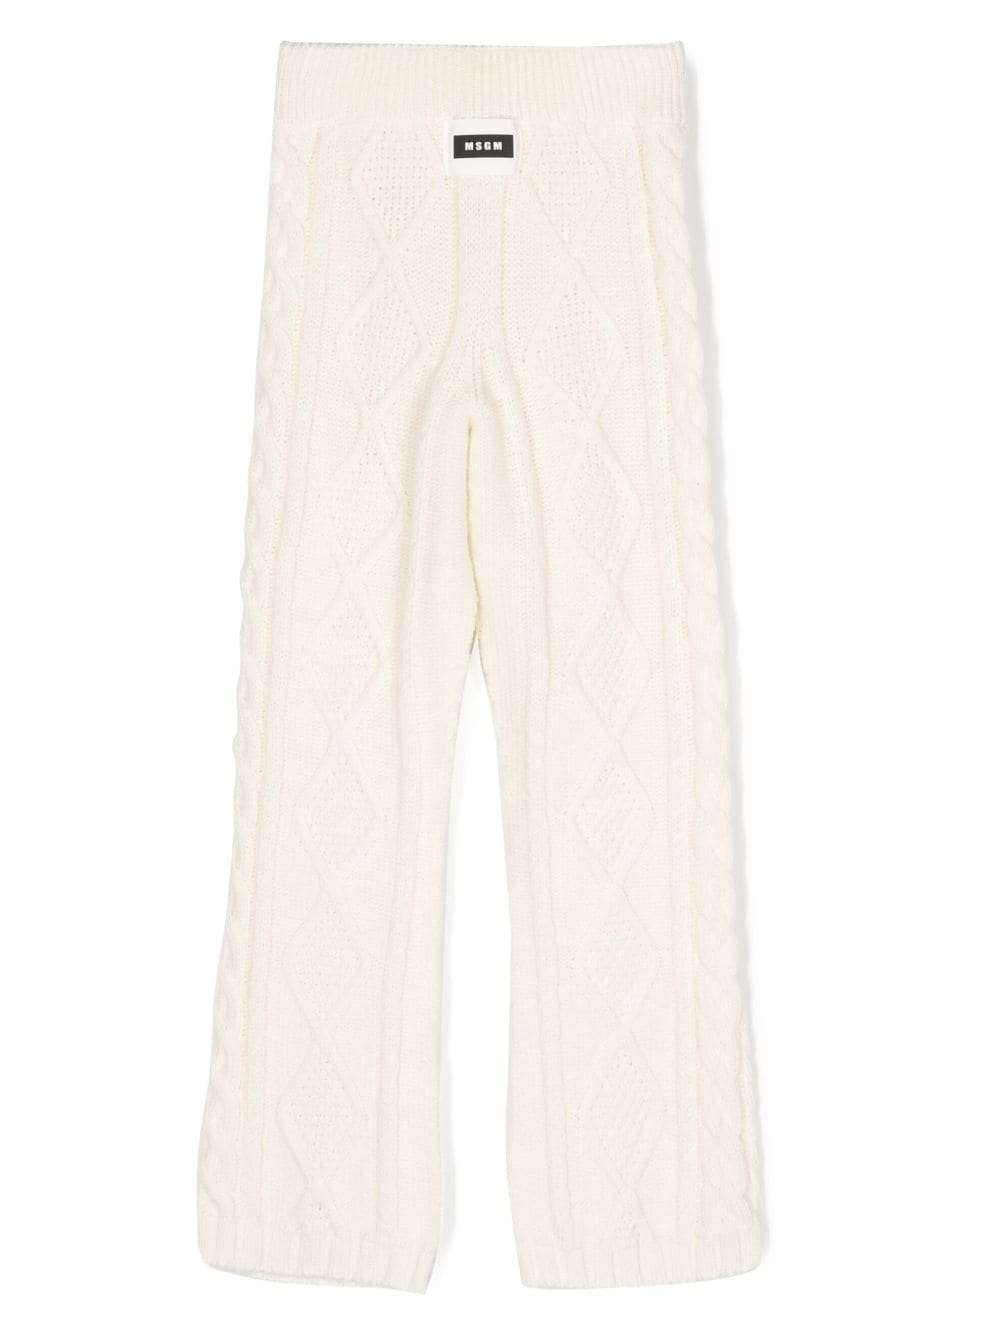 Msgm kids knitted trousers